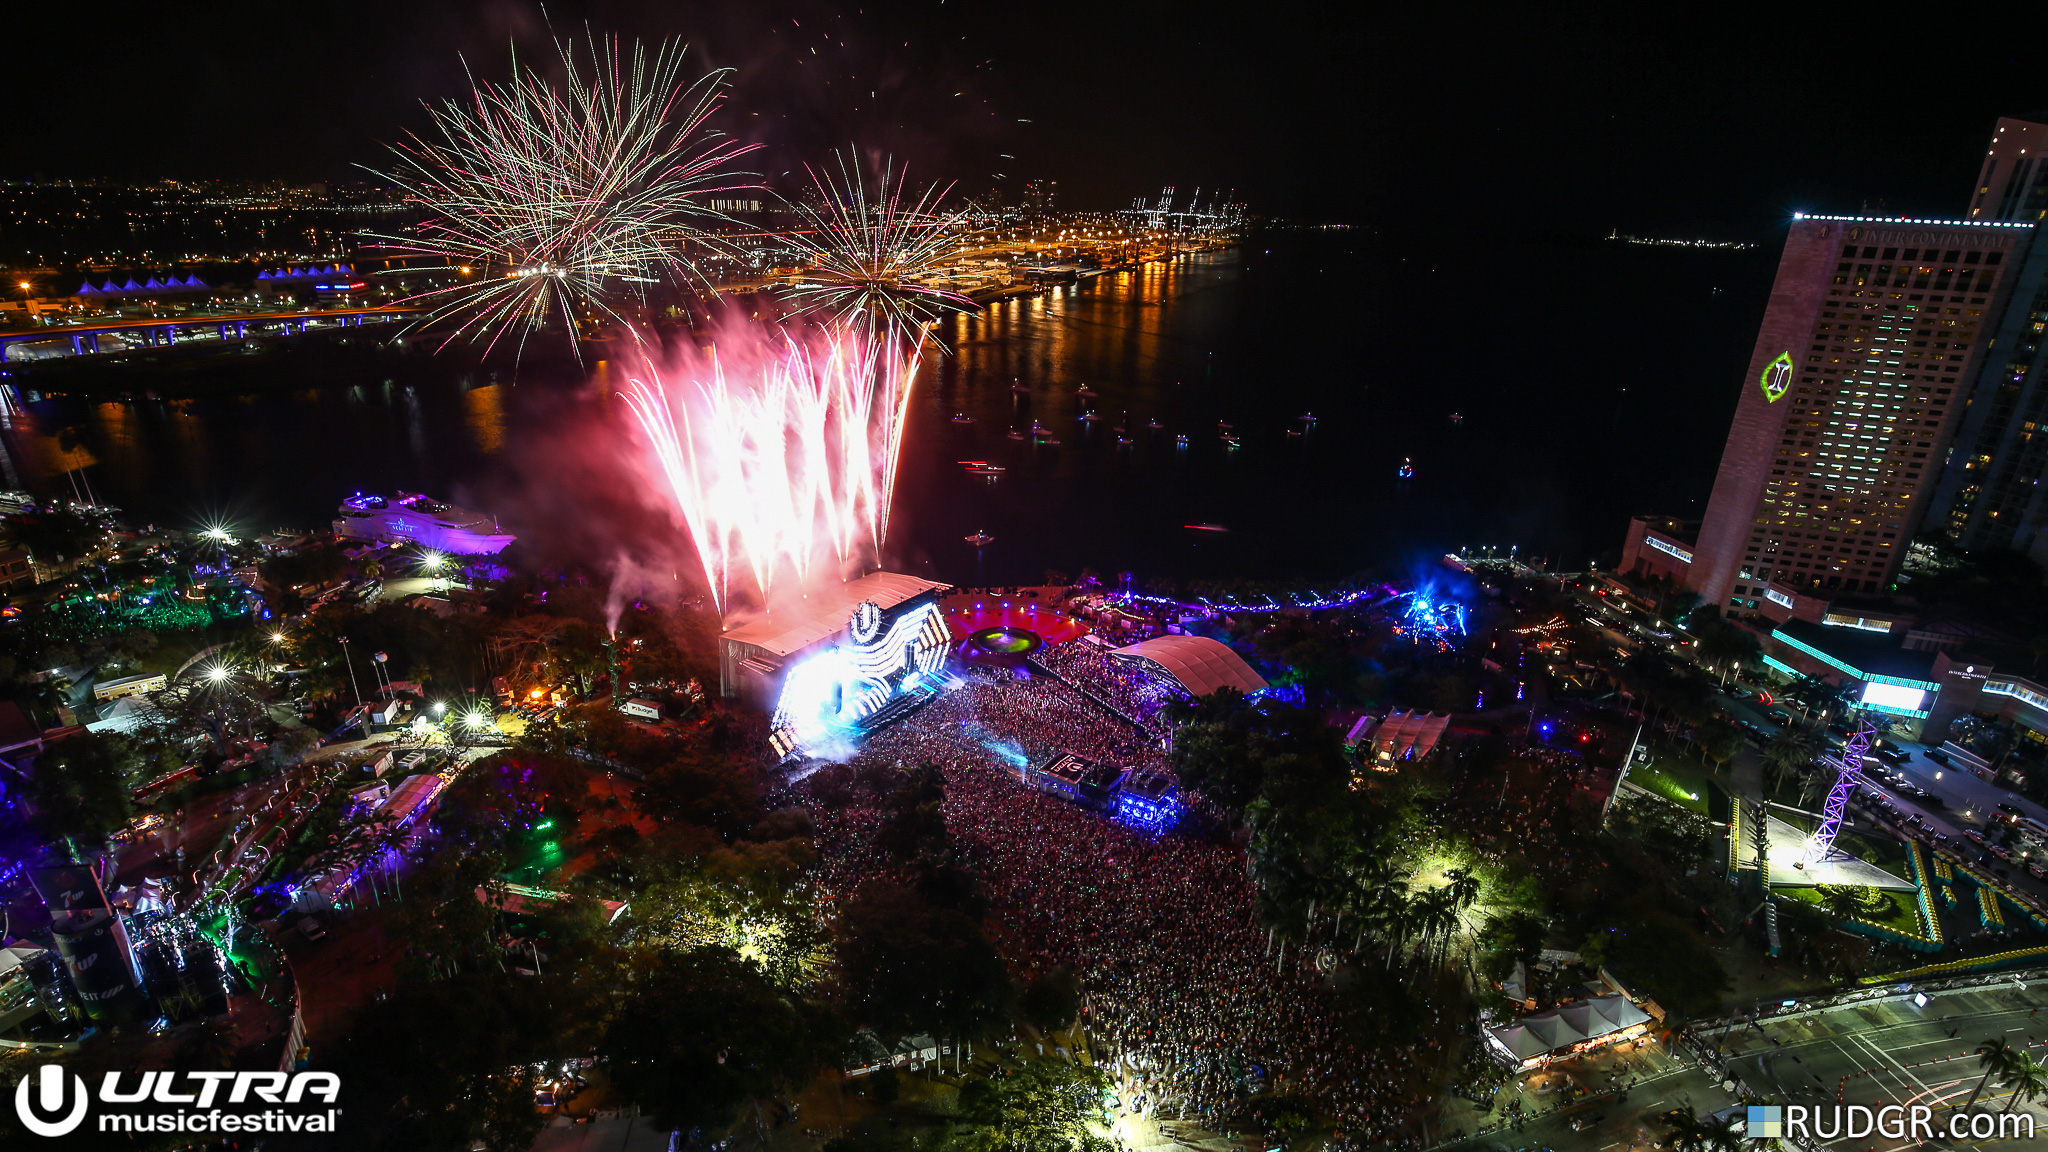 25 Massive Photos That Capture The Magnitude Of Ultra Music Festival 2016 Edm Electronic